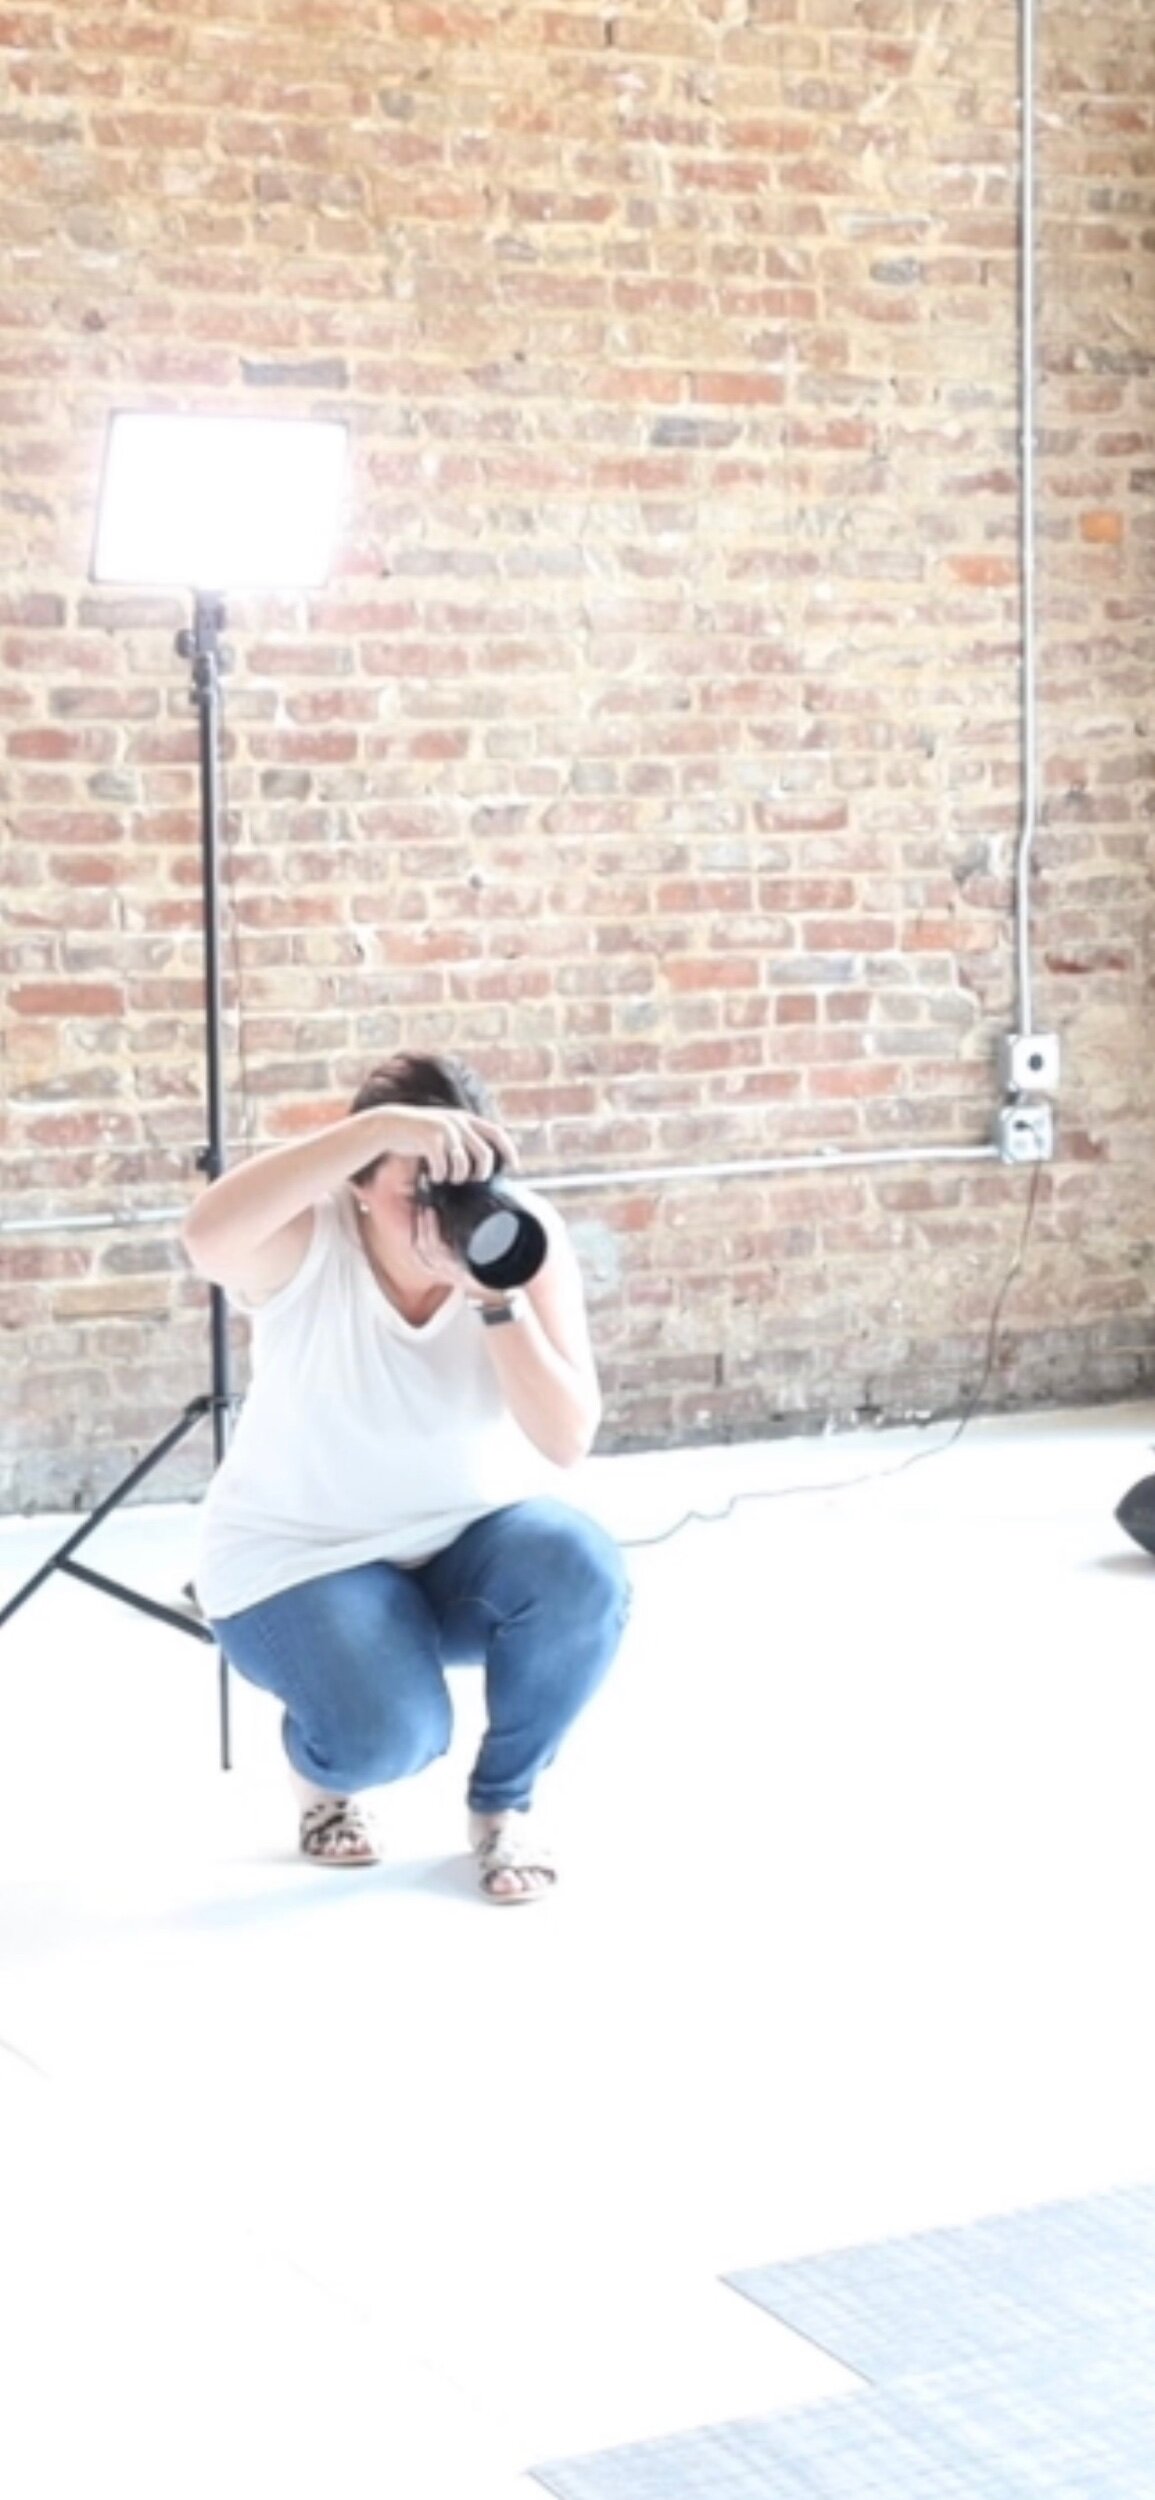 photographer with white top and jeans in a photography studio with brick wall